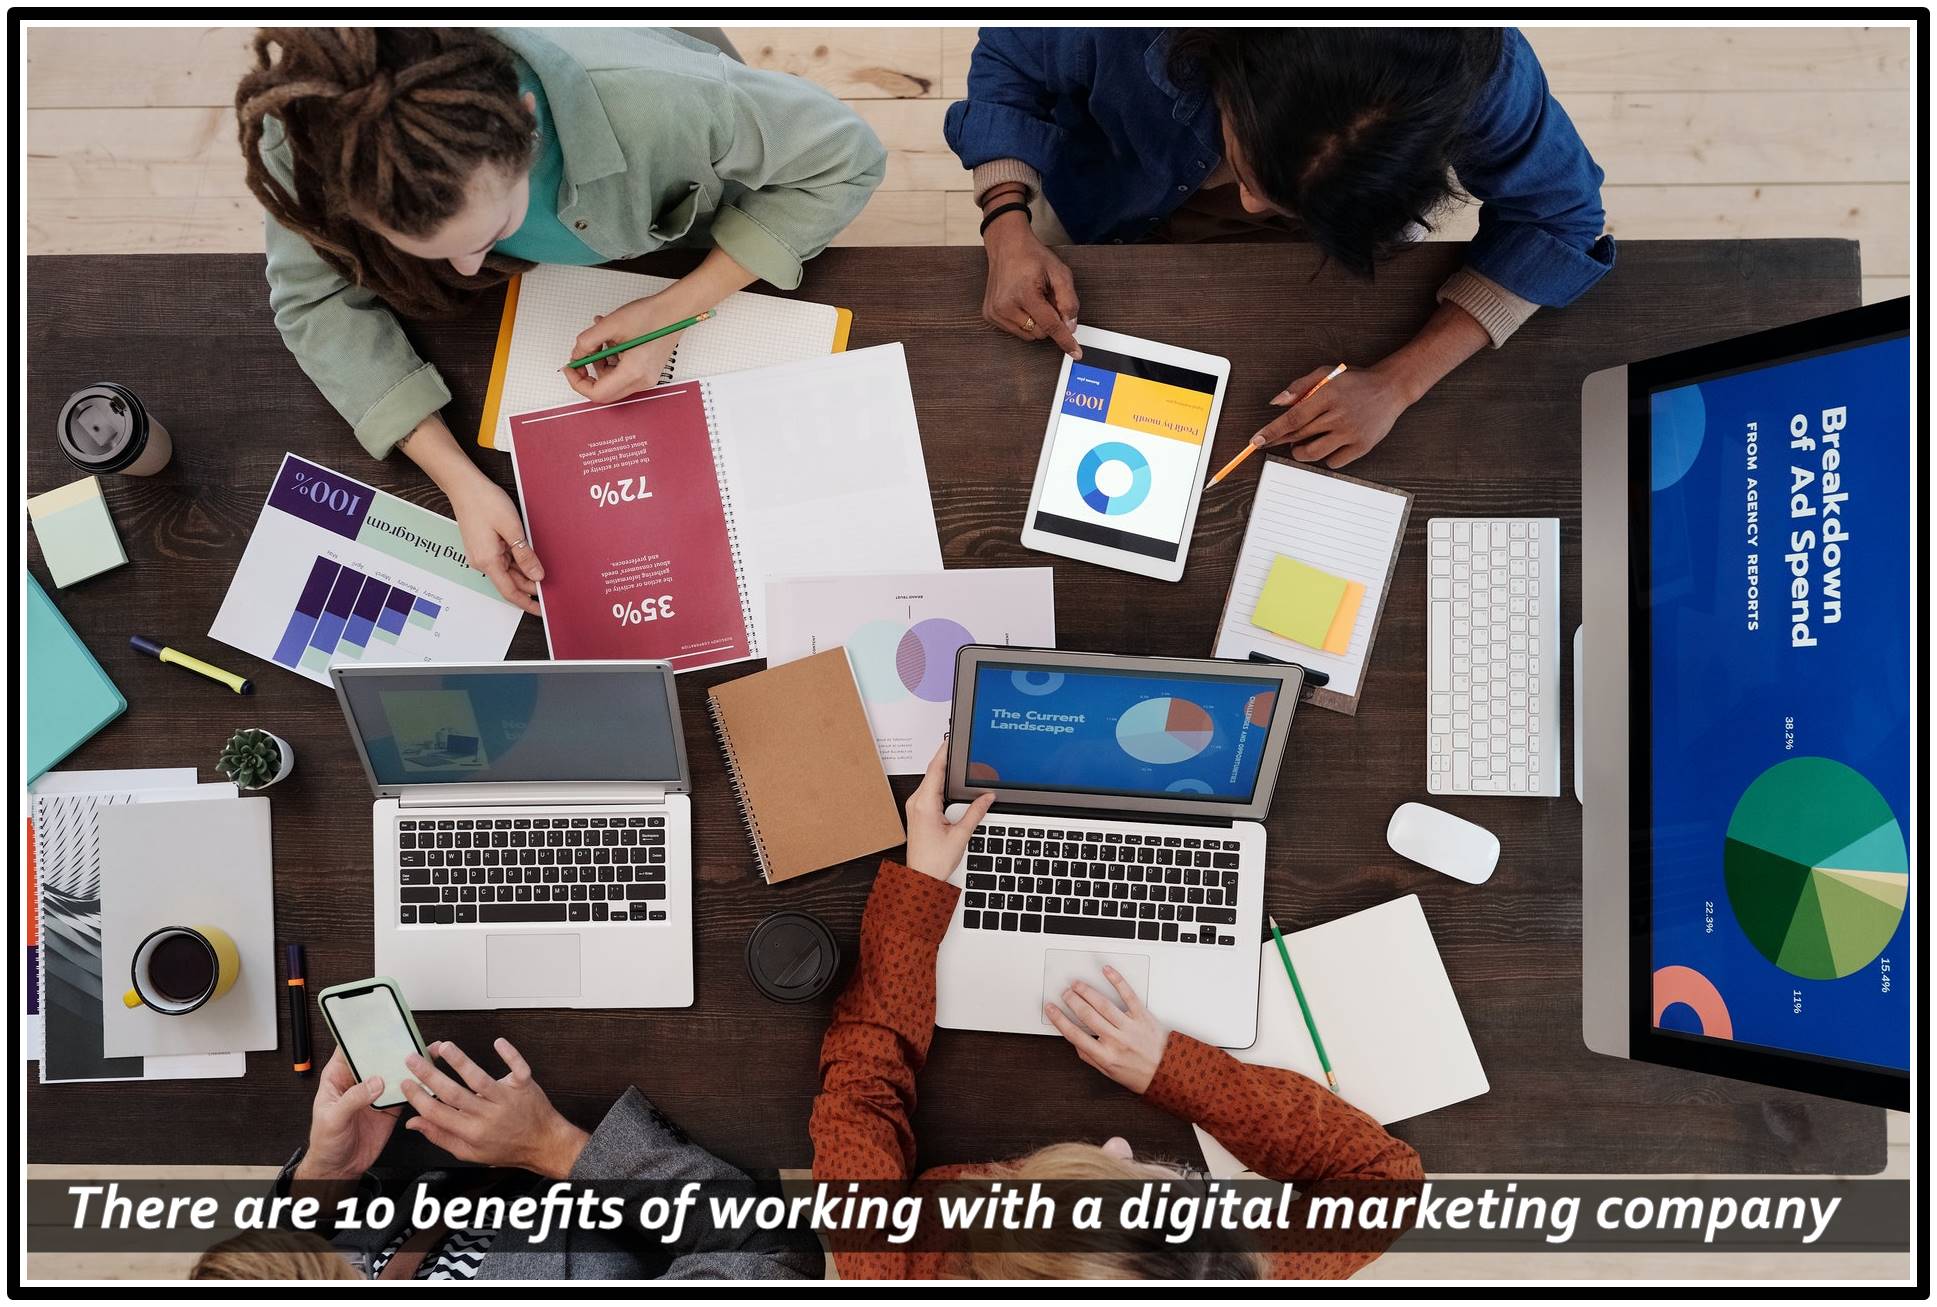 There are 10 benefits of working with a digital marketing company